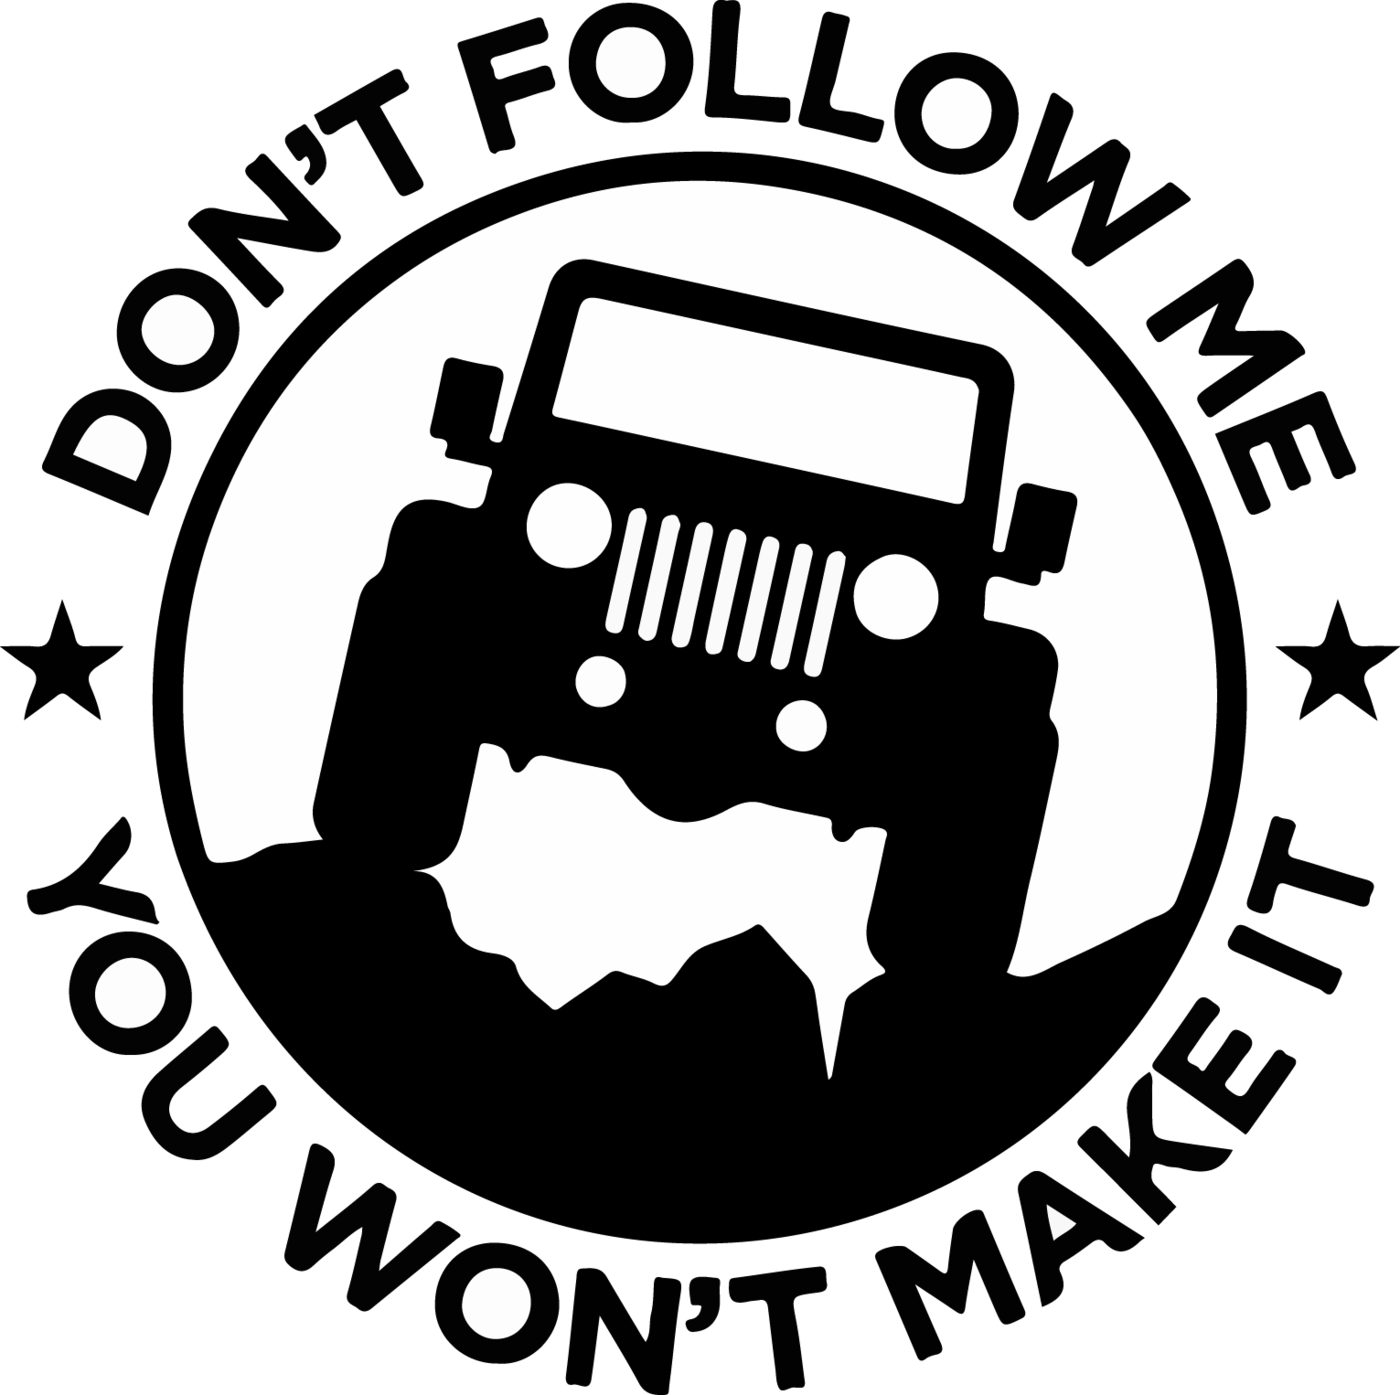 Jeep Clipart Jeep Wrangler Jeep Jeep Wrangler Transparent Free For Download On Webstockreview 2020